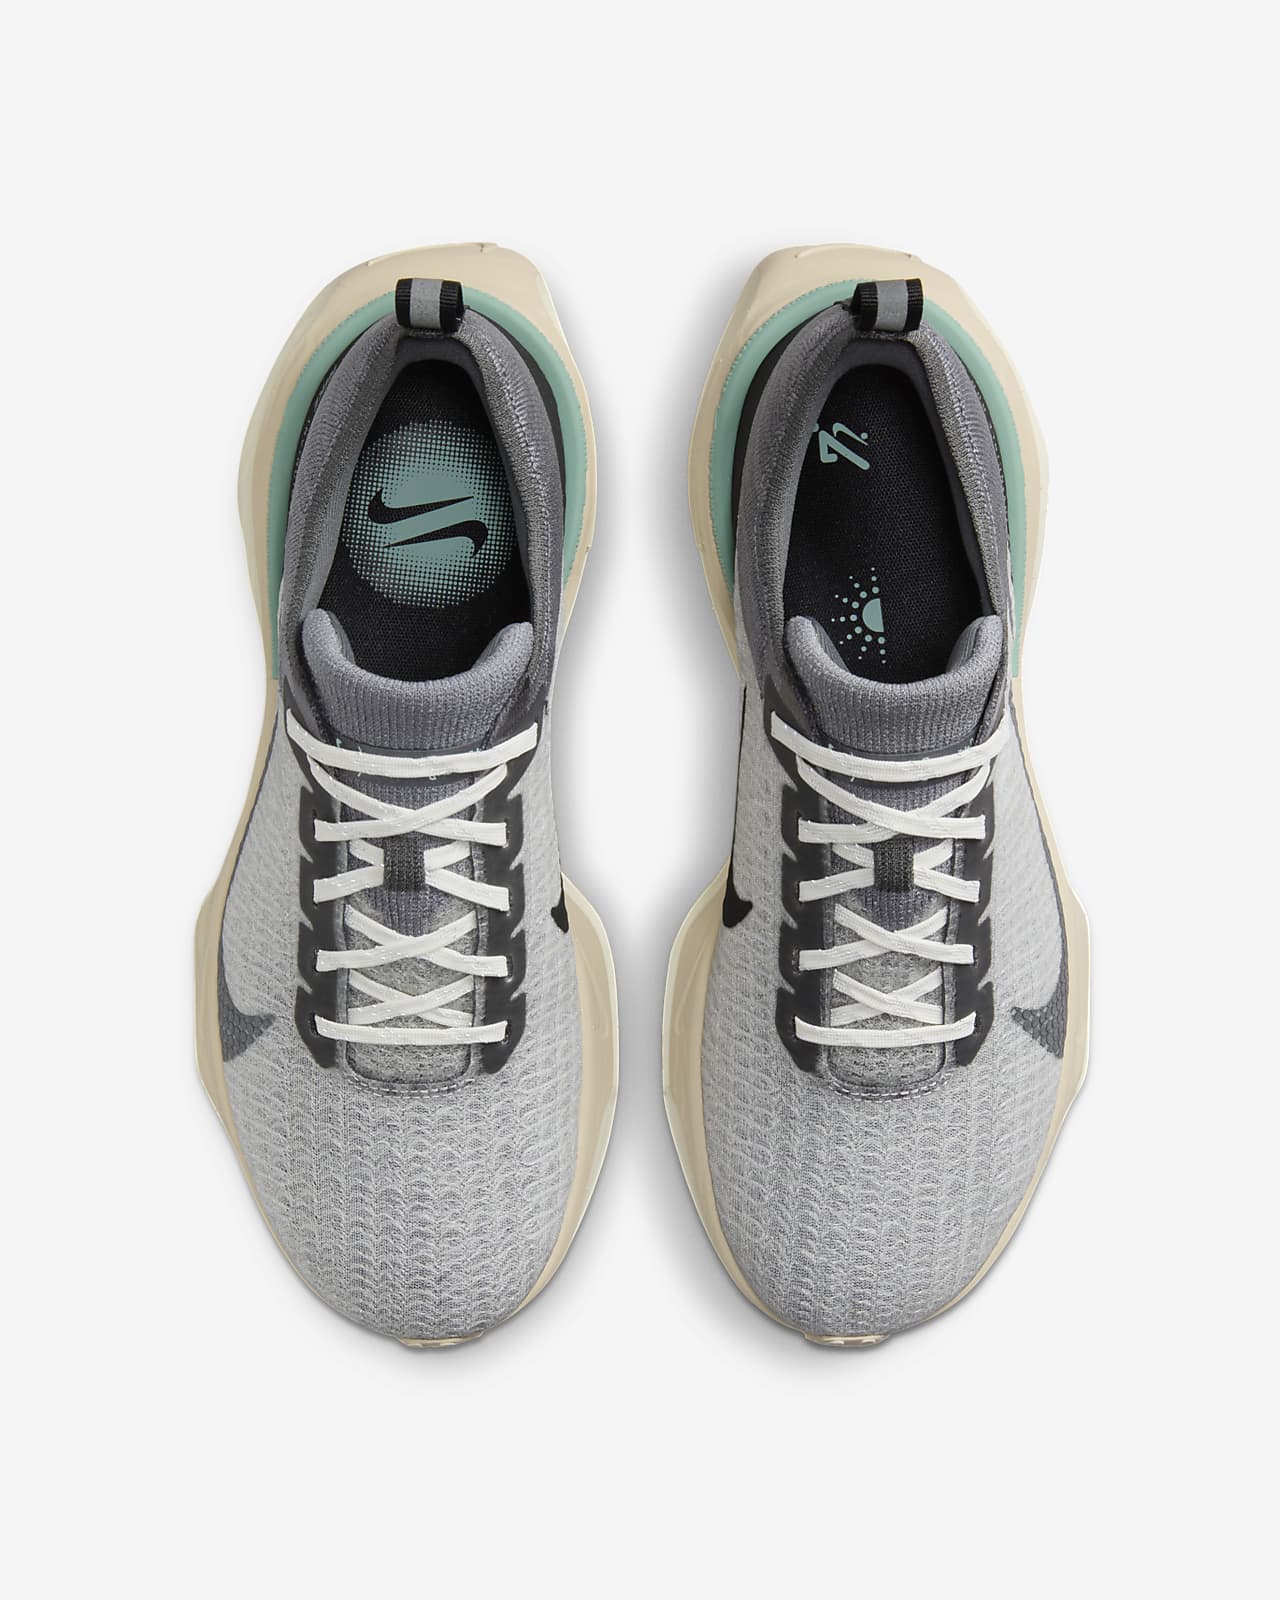 The Nike ZoomX Invincible Run Flyknit 3 Is Sleek in Cool Grey and Pewter